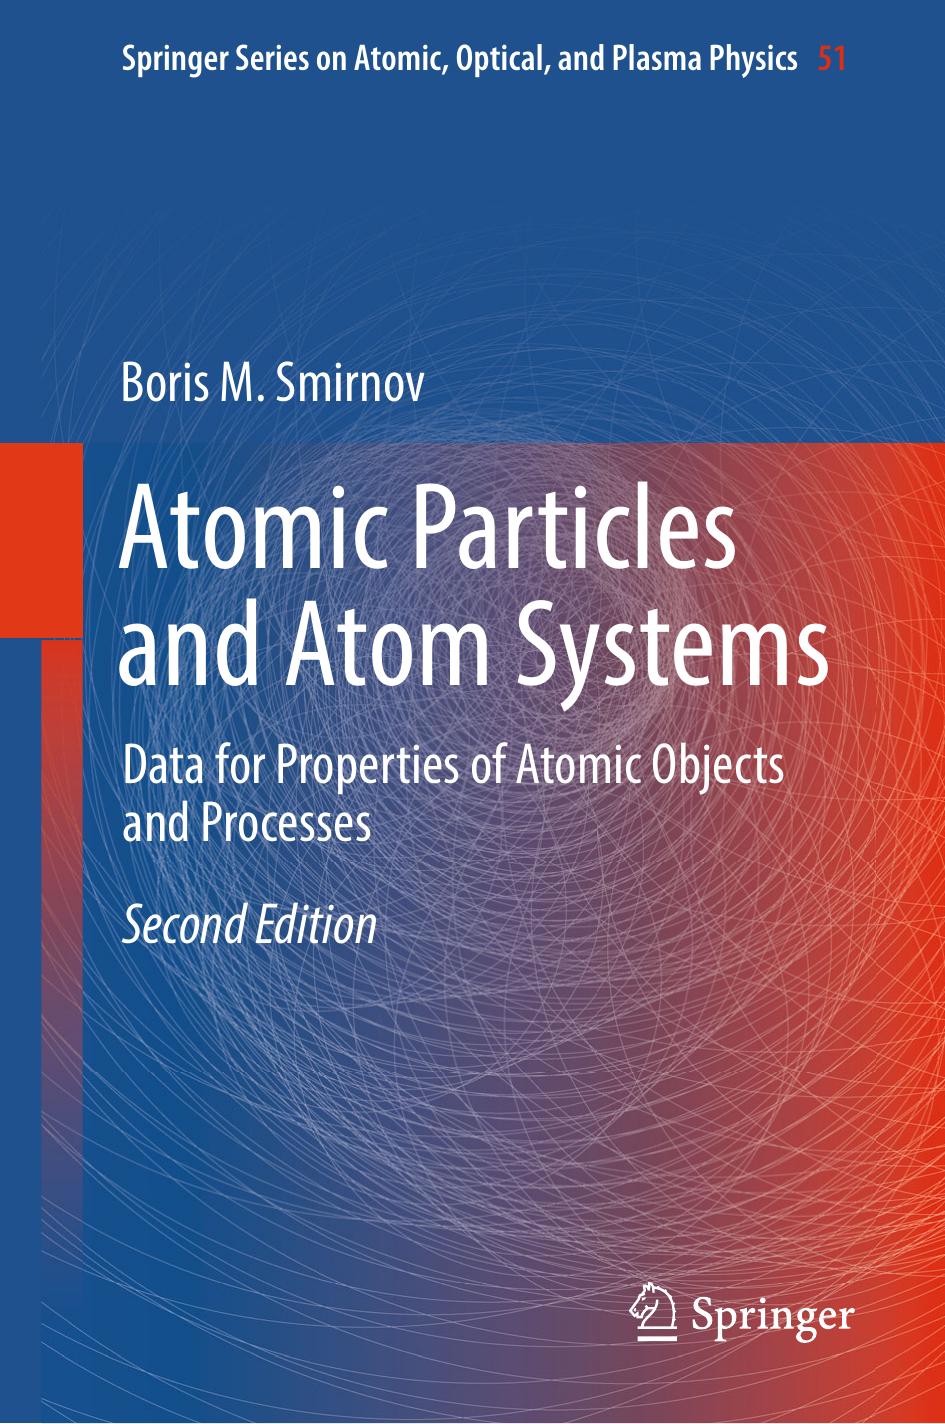 Atomic Particles and Atom Systems by Boris M. Smirnov